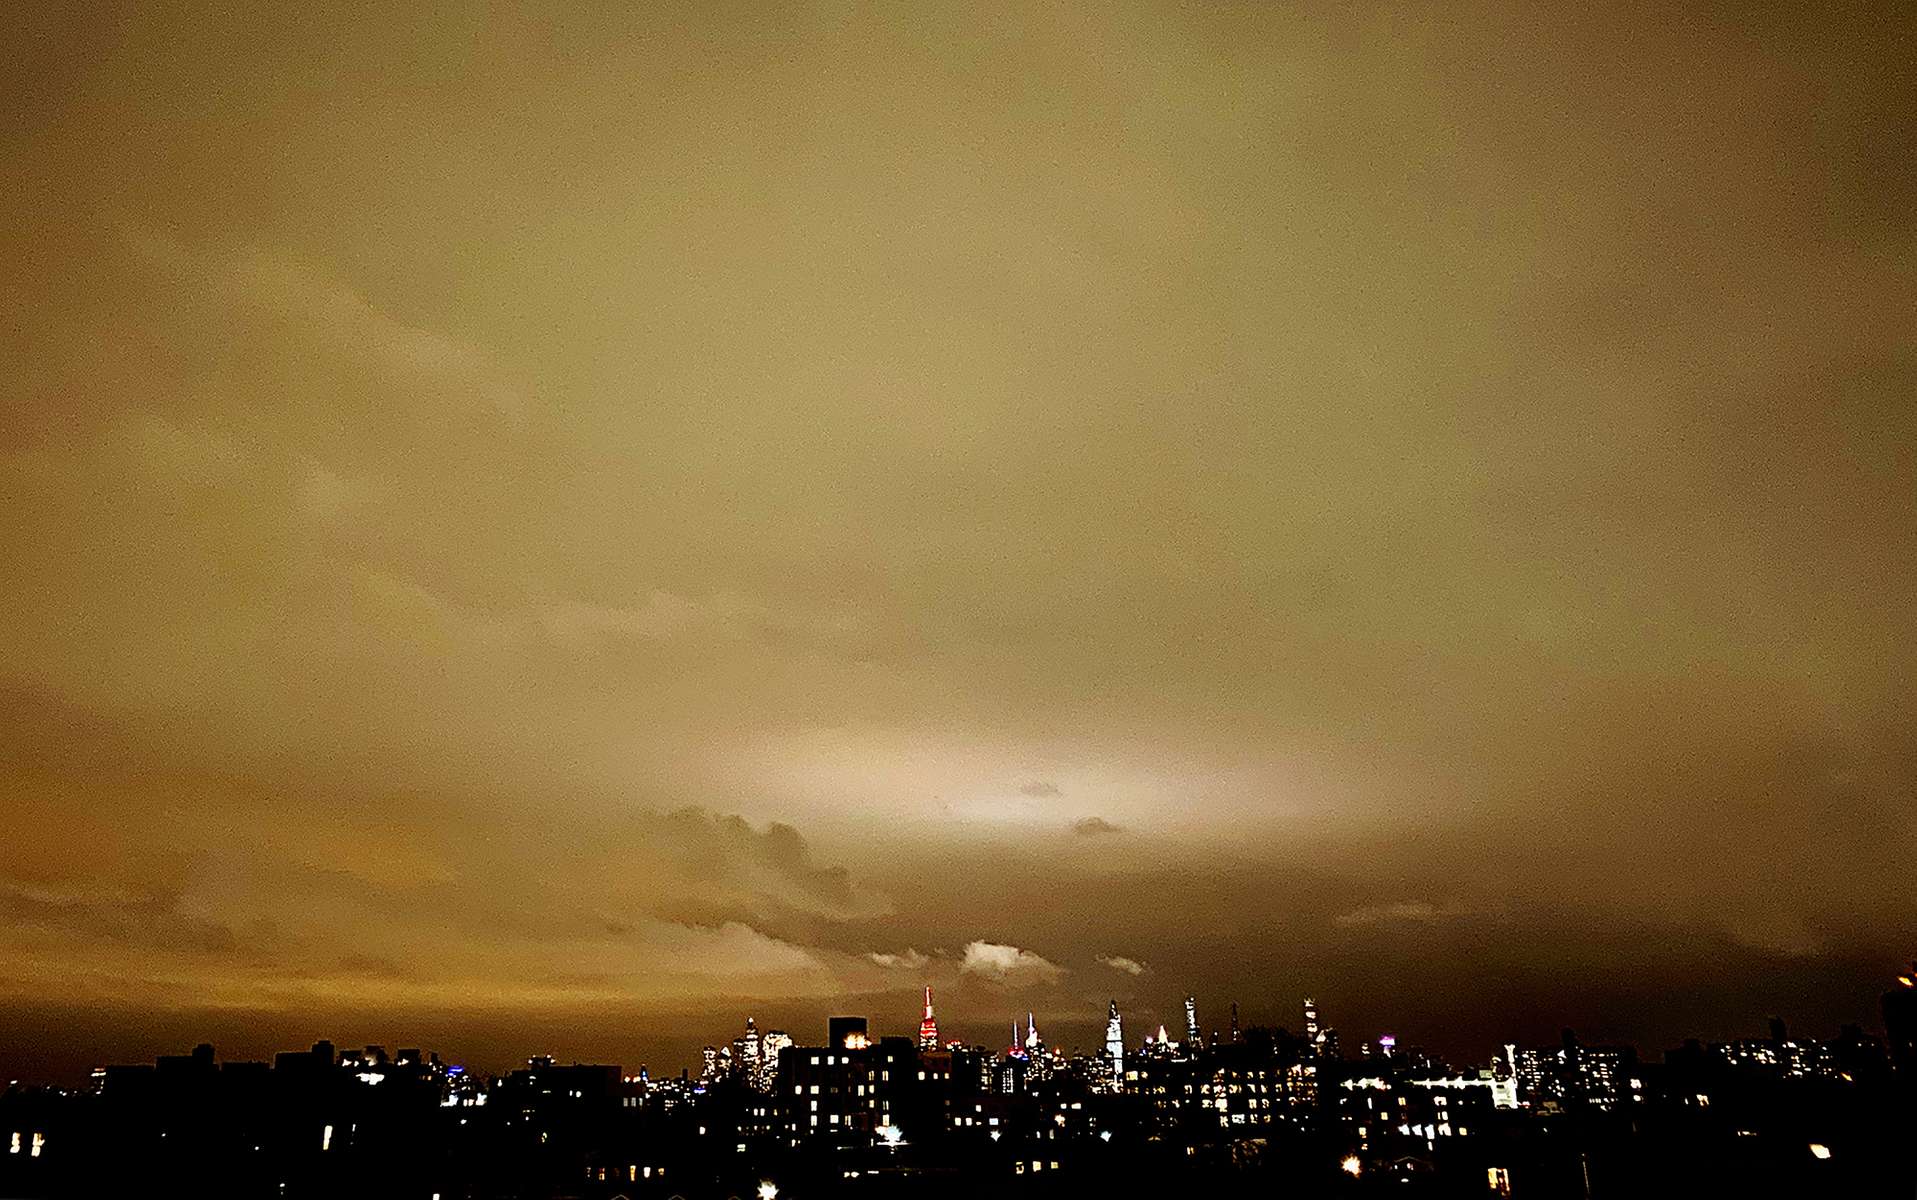 The sun sets over a quarantined New York City. I've heard yellow and orange rarely are popular colors. Some say this is because their luminous spectrum drains the eye of energy, while others associate a mustard hue with warning or disease. (March 2020, Brooklyn, NY.) 